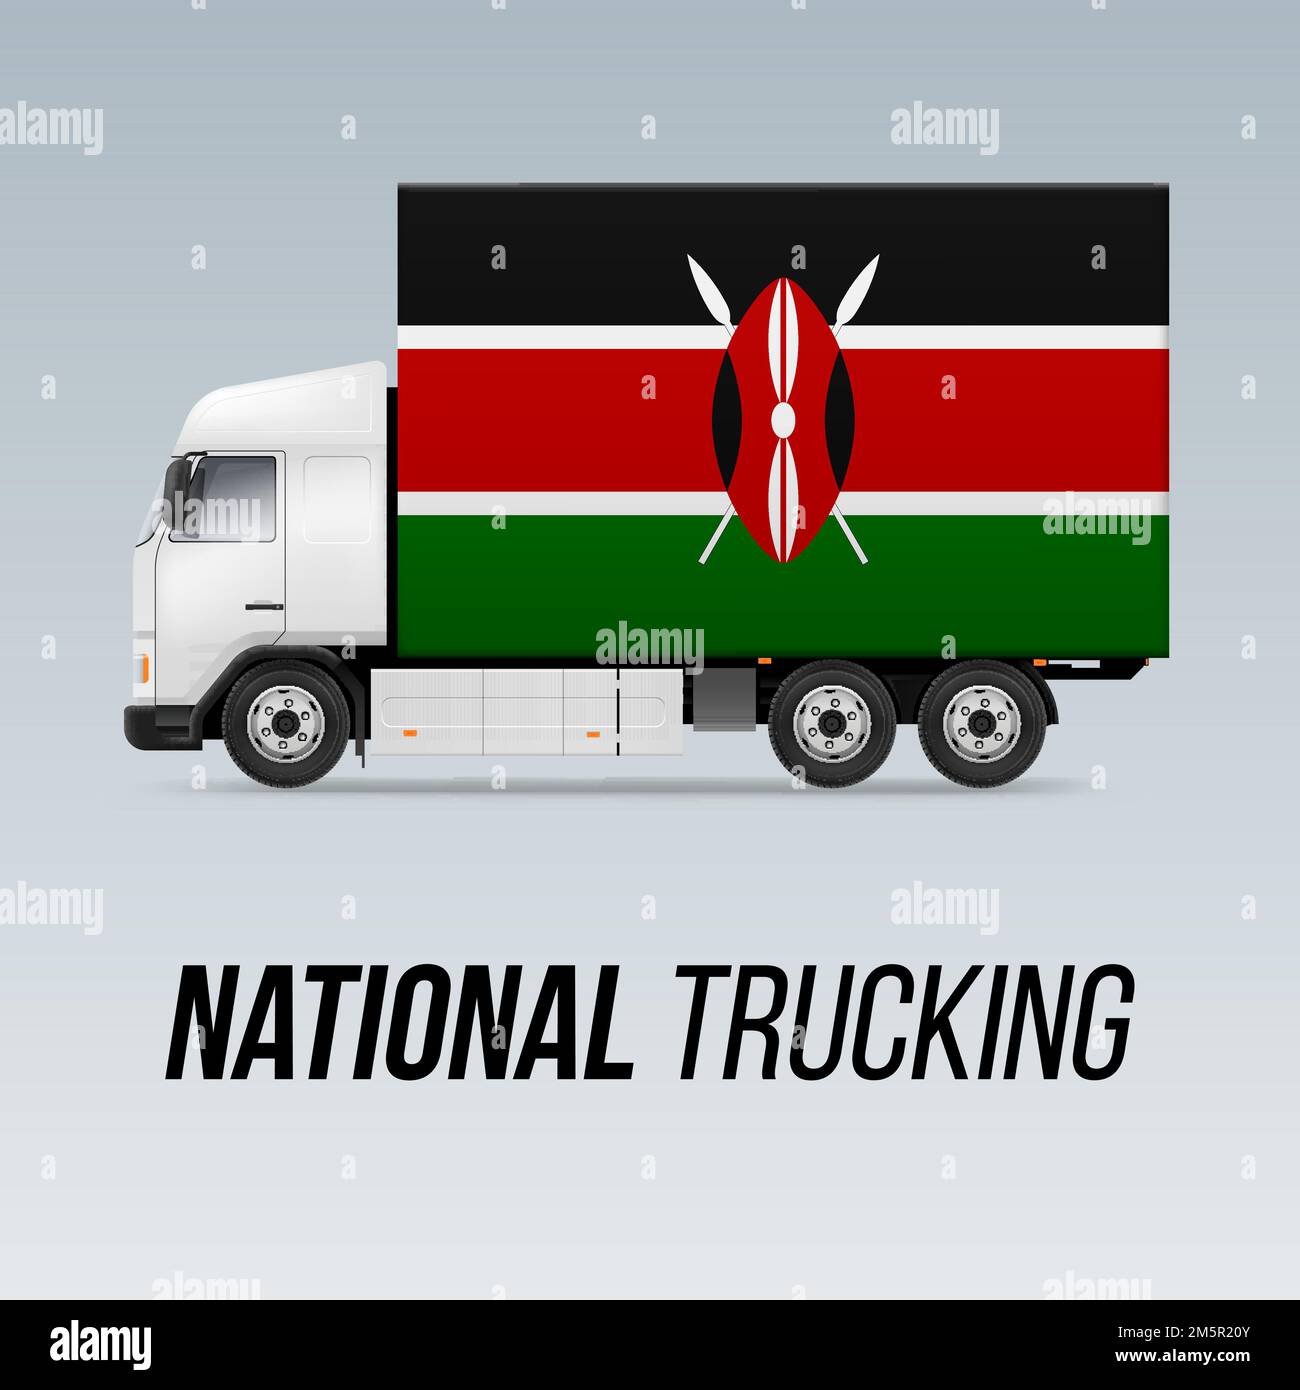 Symbol of National Delivery Truck with Flag of Kenya. National Trucking Icon and Kenyan flag Stock Vector